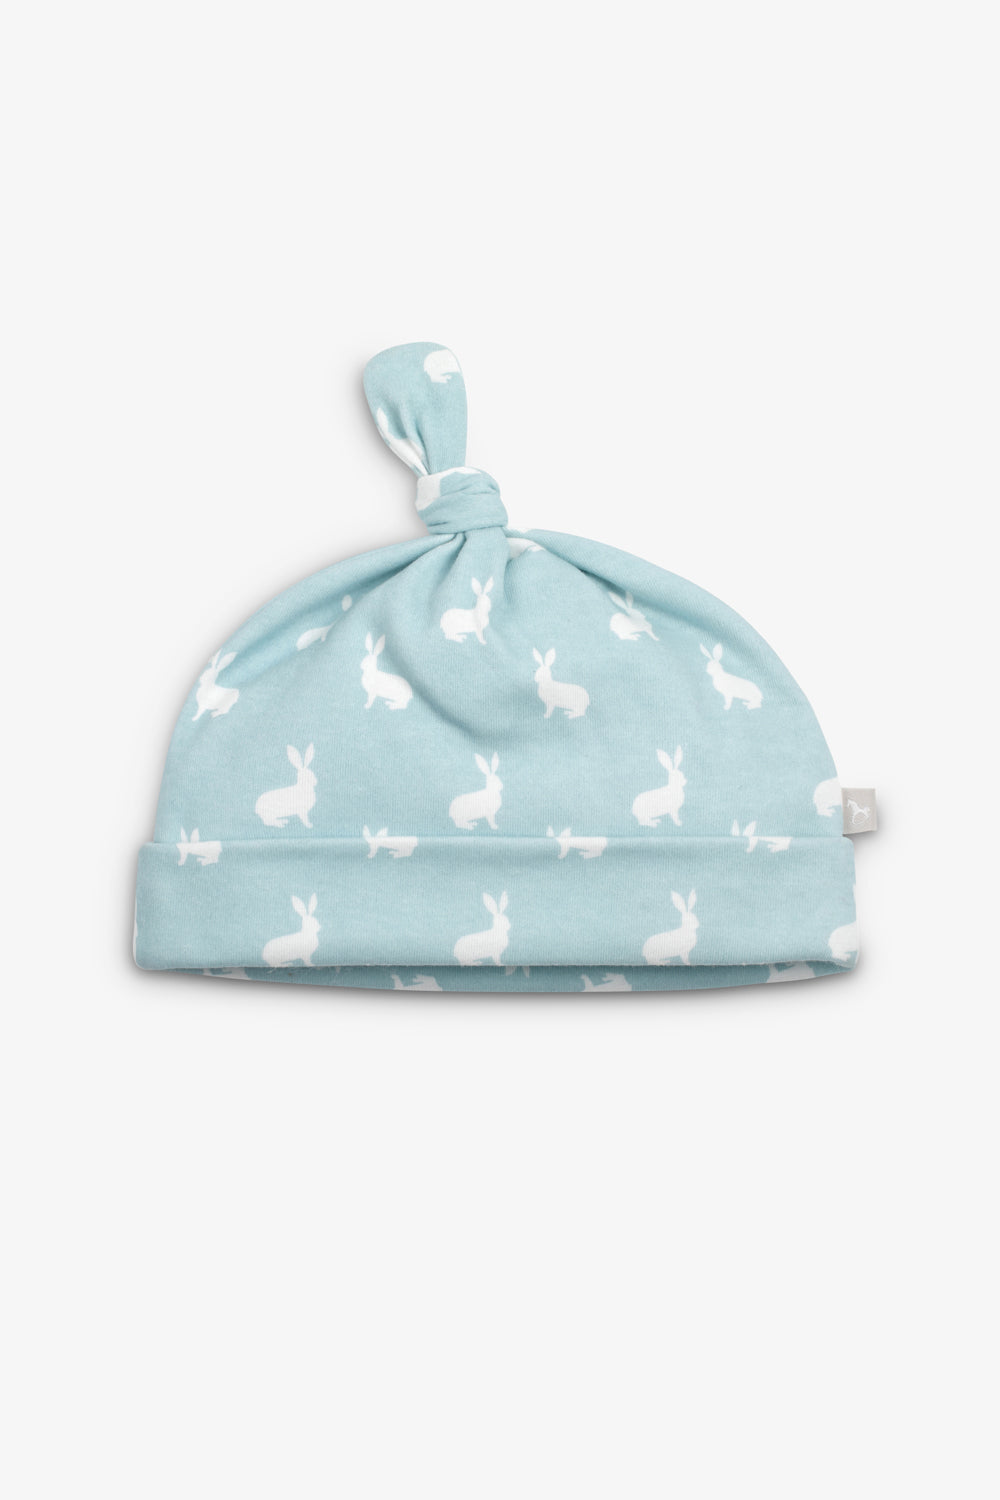 Welcome Little Baby Gift Set, sky blue hare print